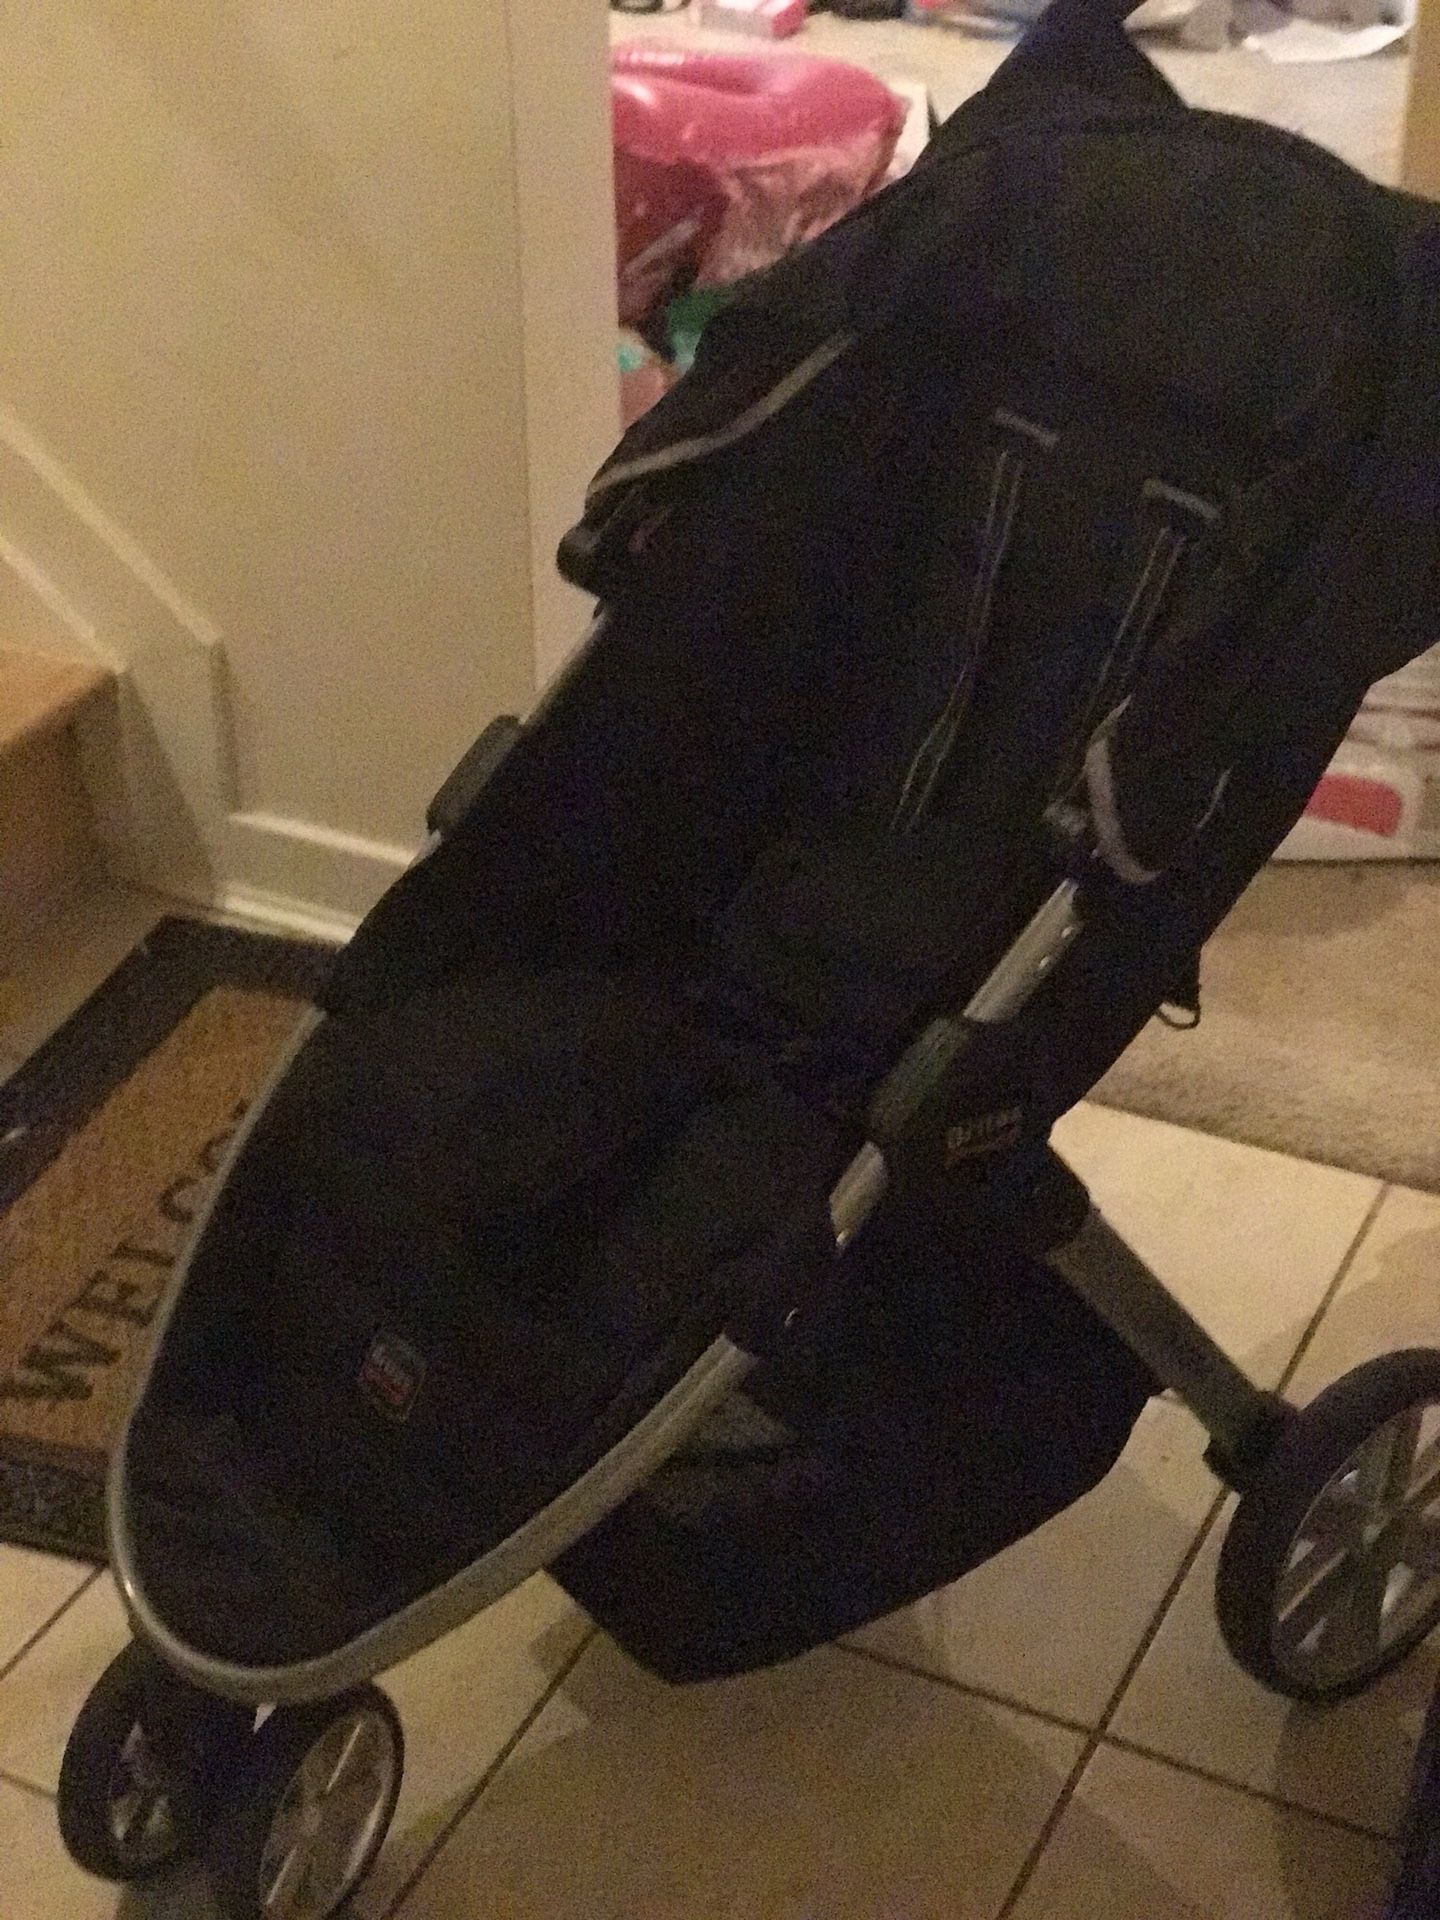 Britax Travel System: Stroller, Car seat and base